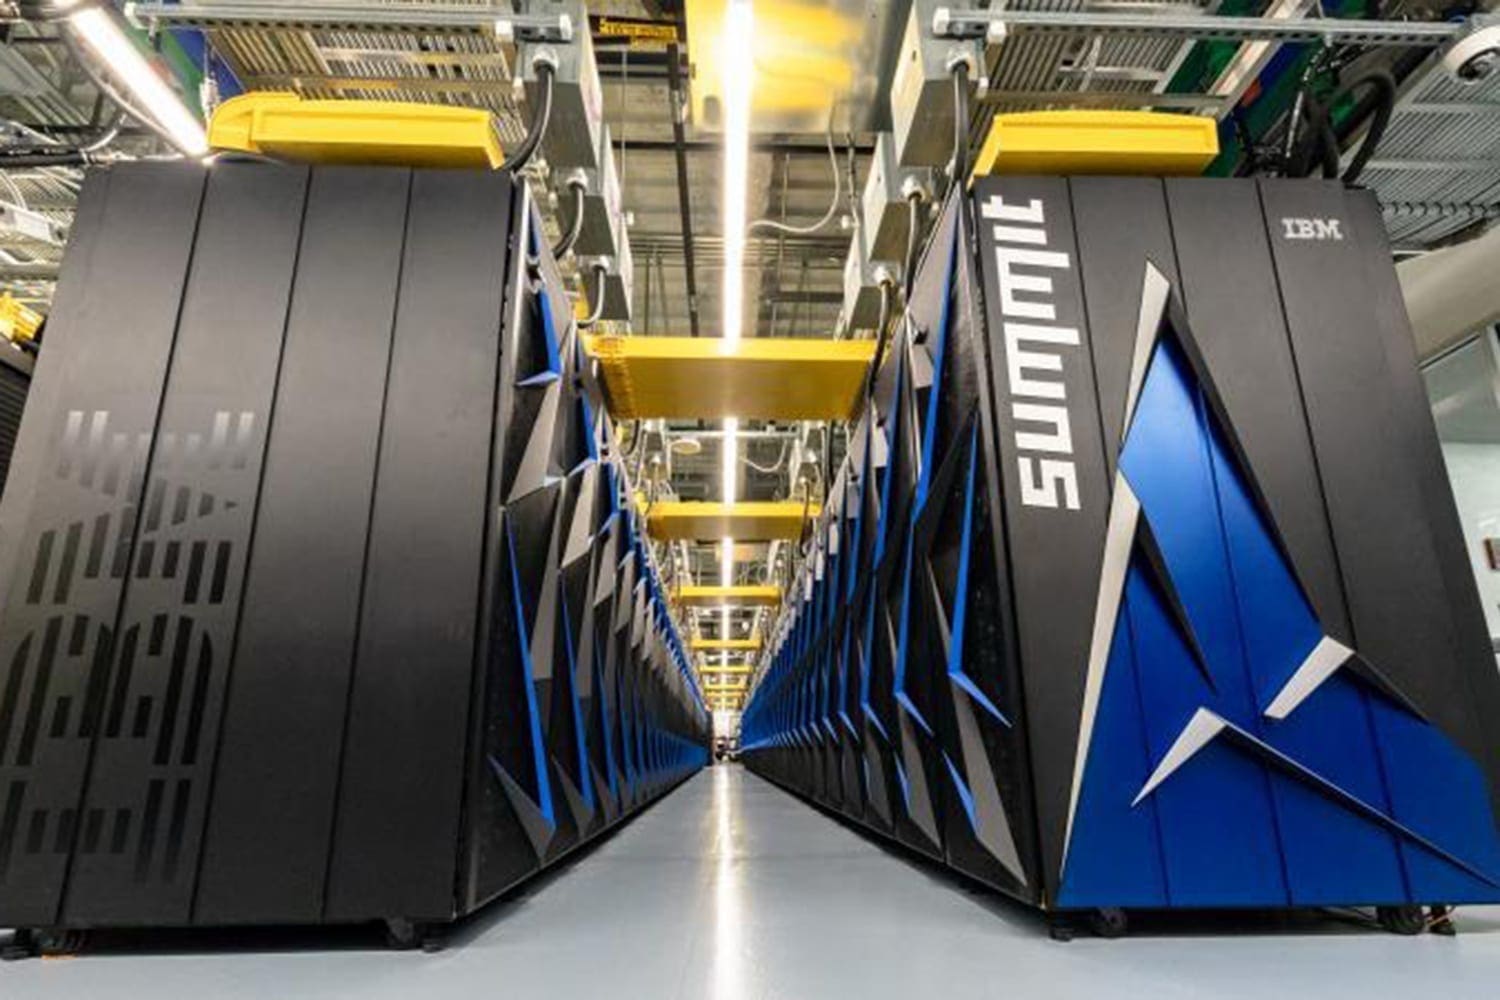 Supercomputers Recruited to Work on COVID-19 Research